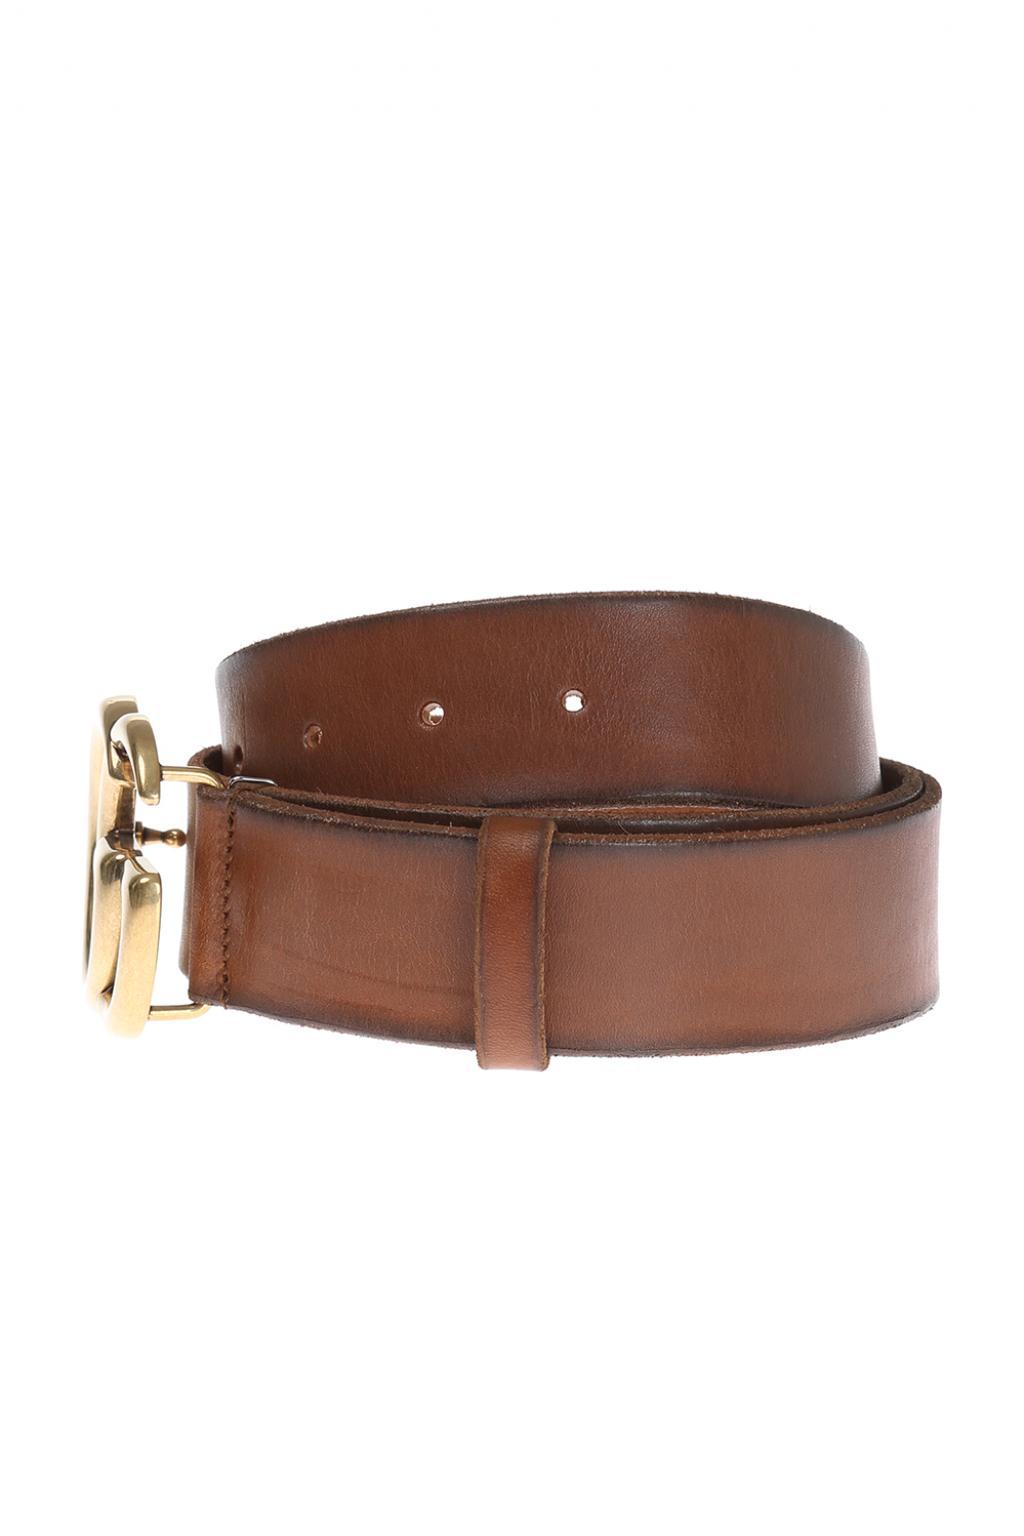 Gucci Leather Belt in Brown for Men - Lyst